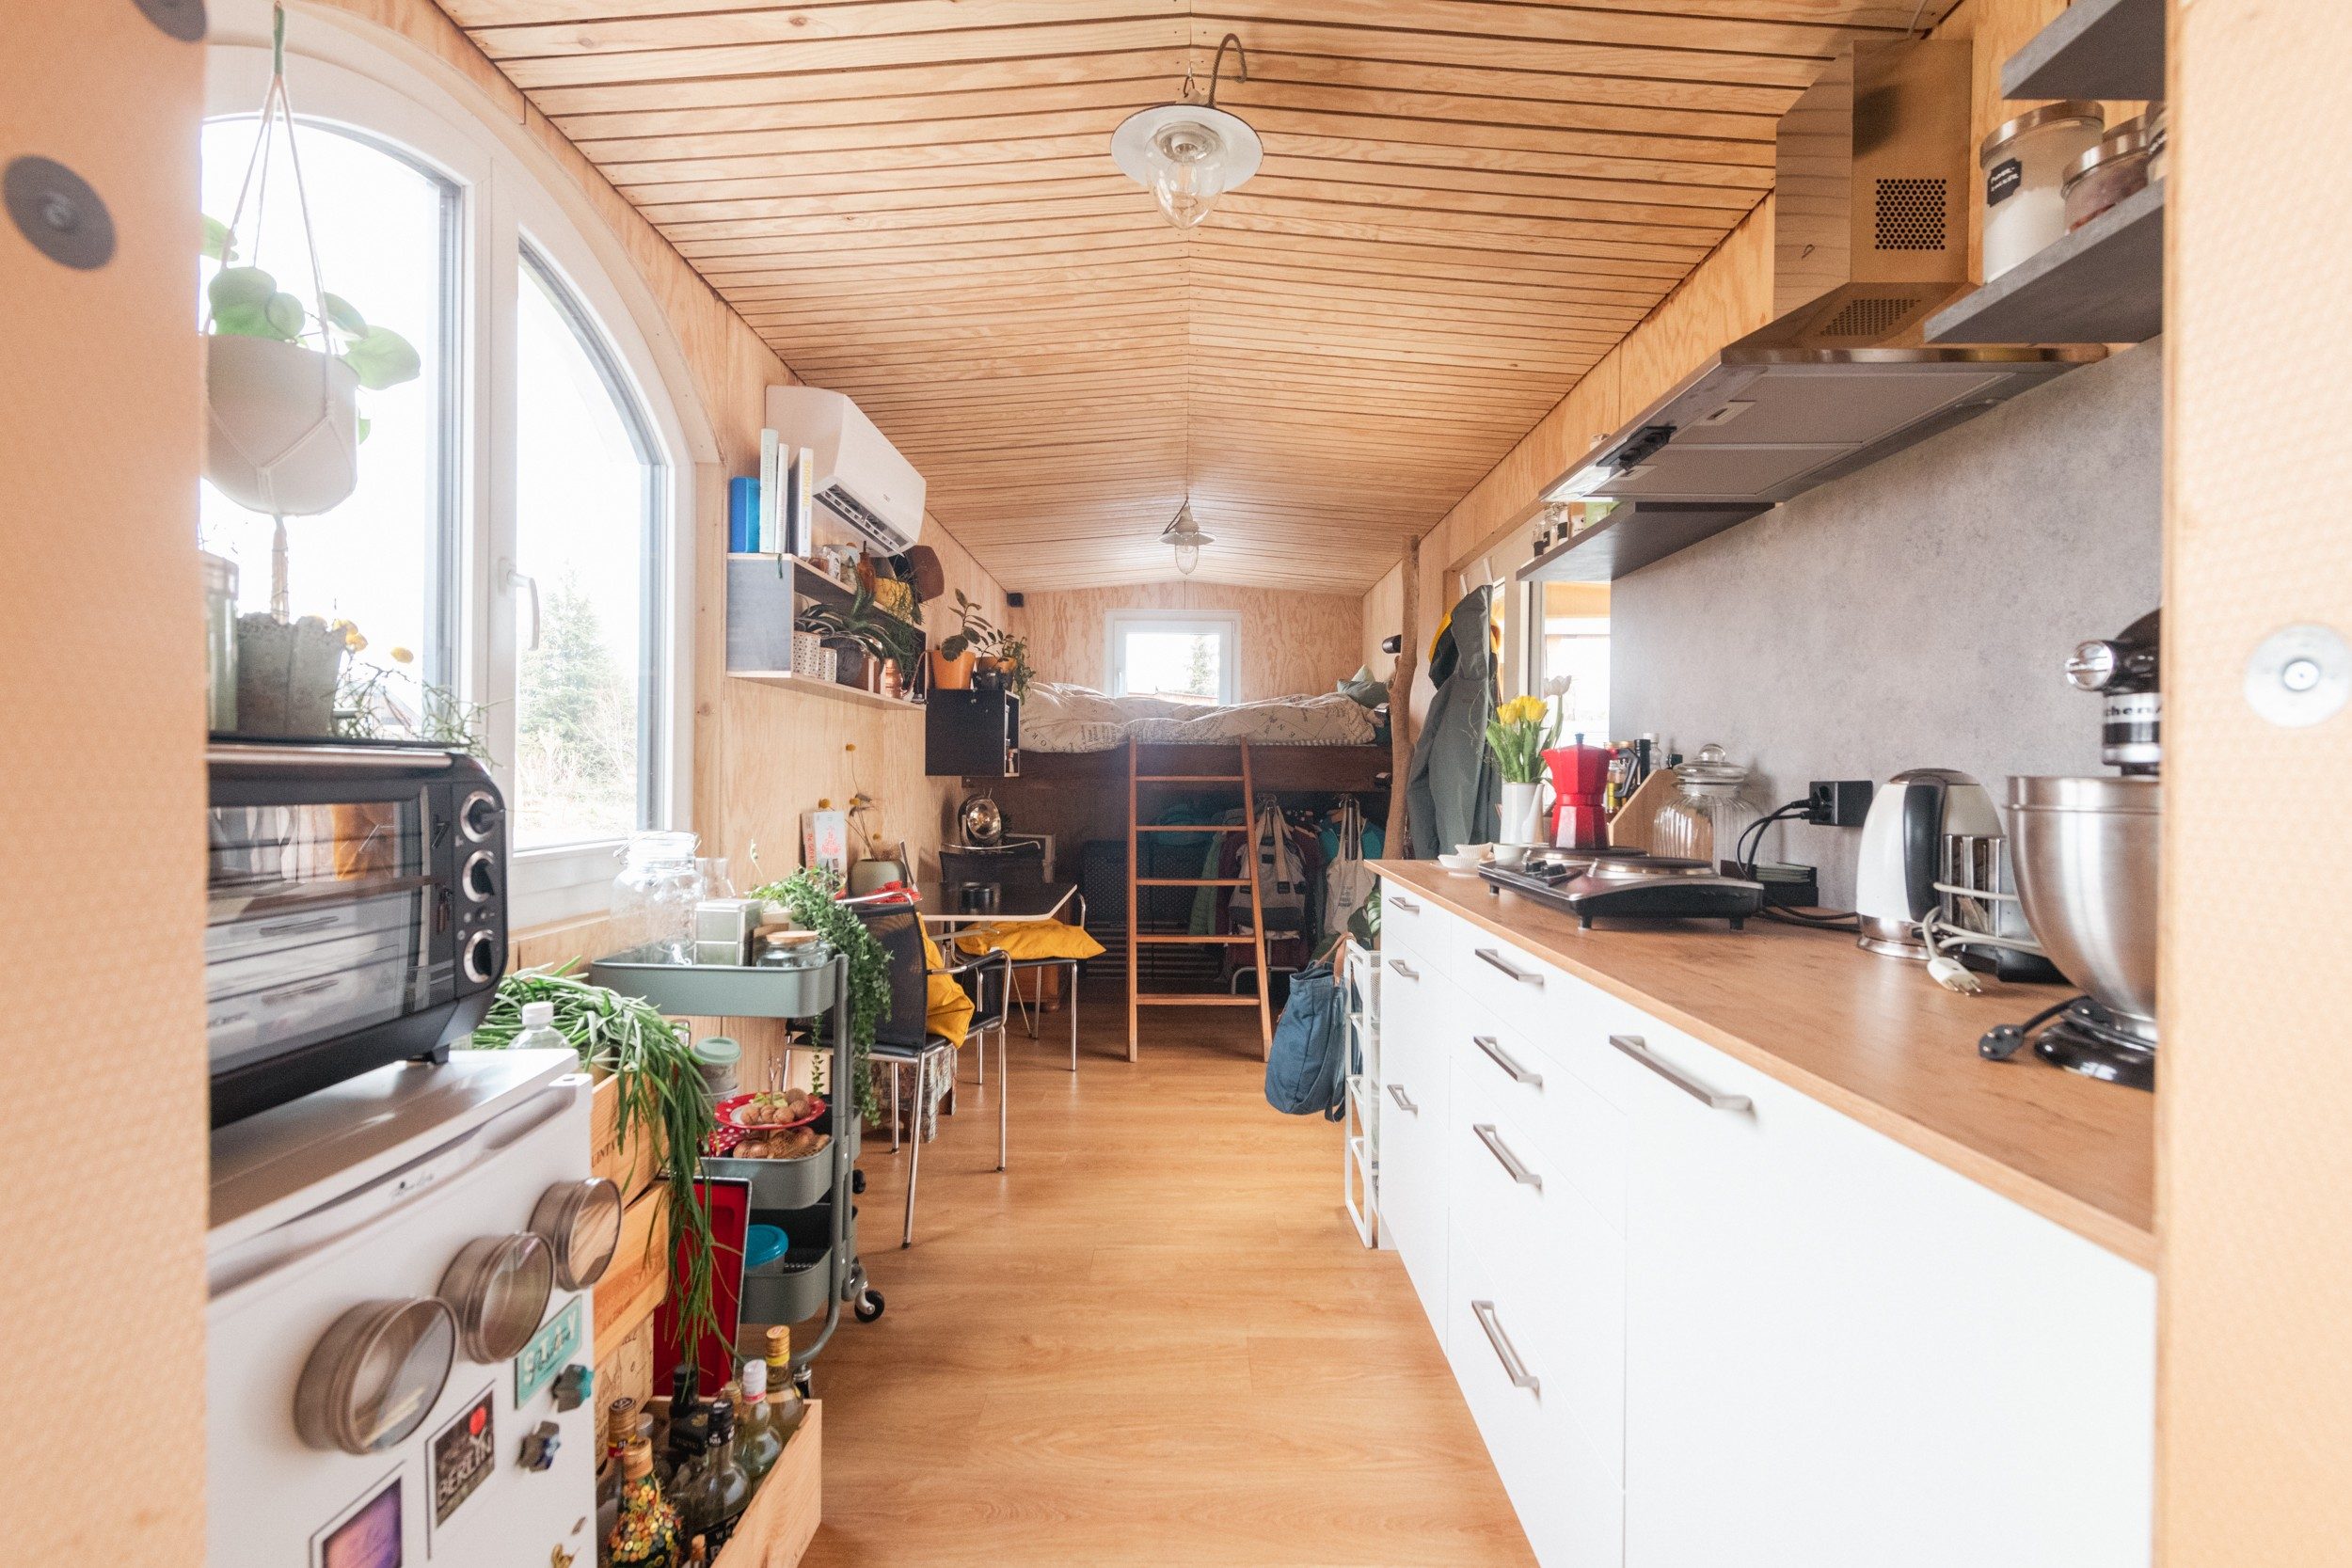 A tiny house with kitchen and bed in one room